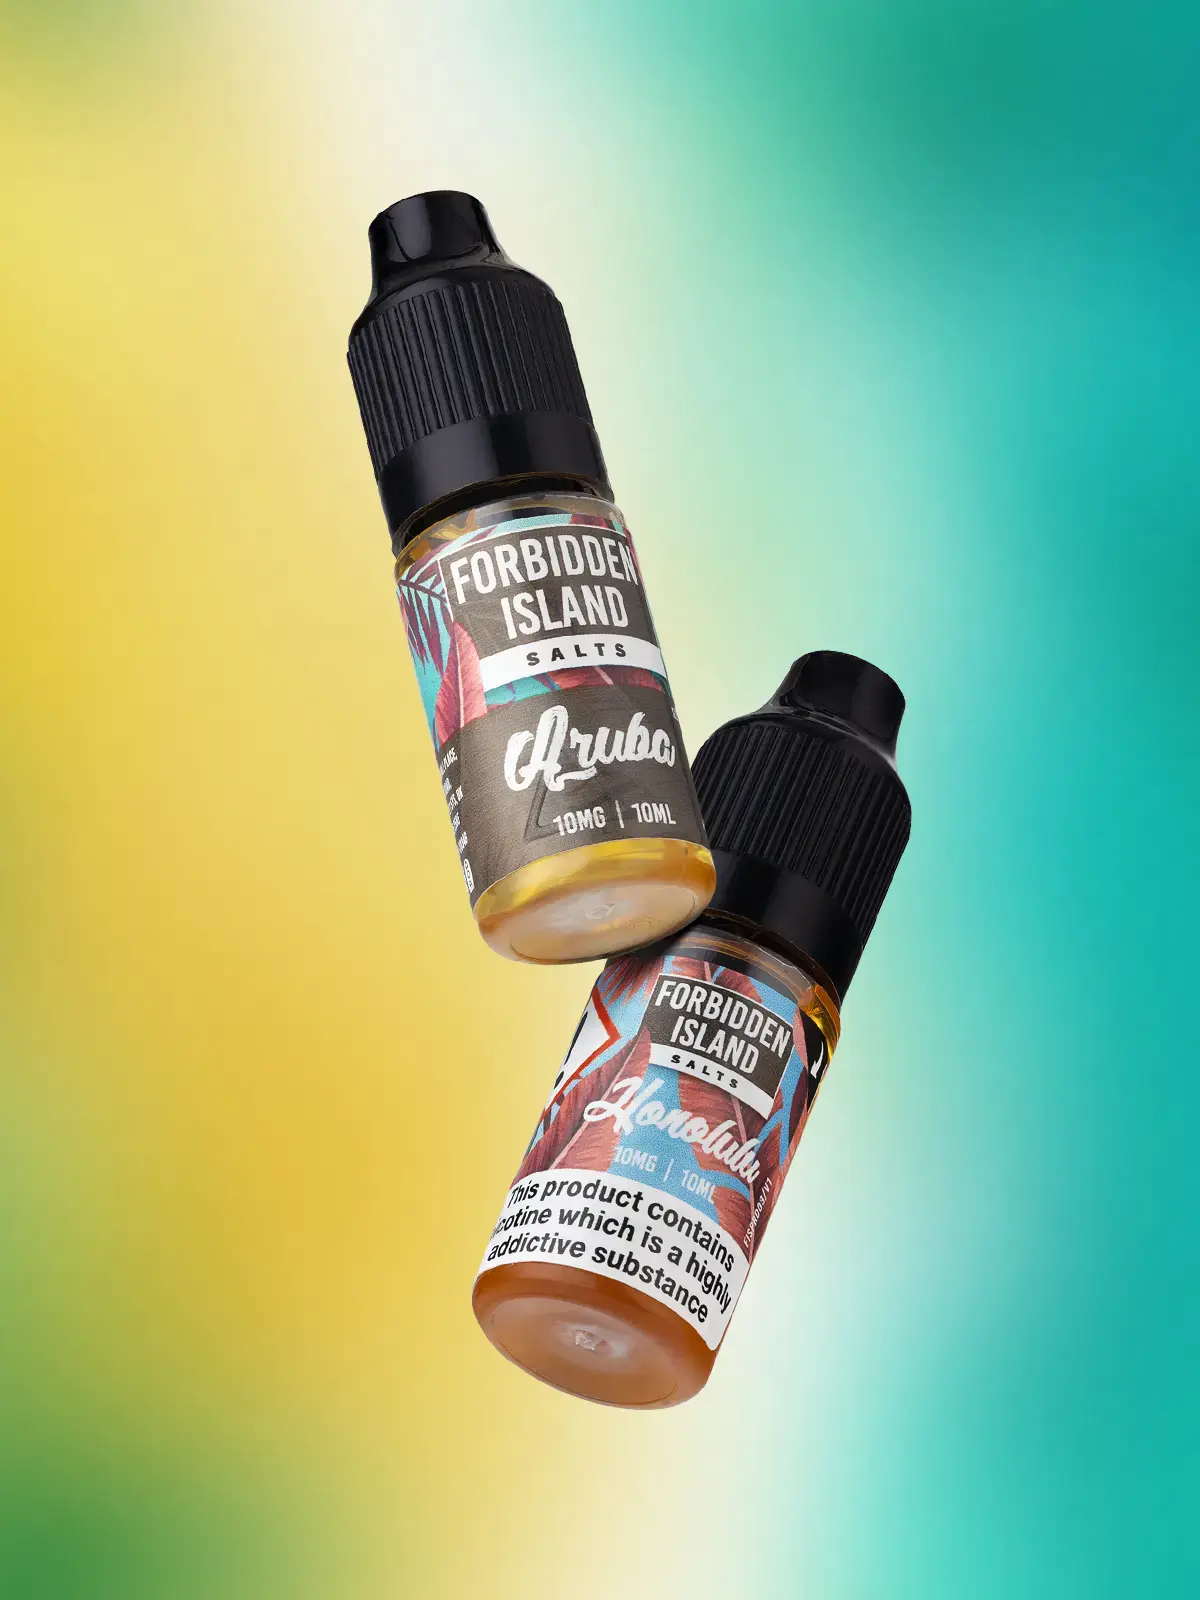 Two bottles of Forbidden Island salts e-liquid; Aruba and Honolulu flavours floating in front of a yellow and turquoise background